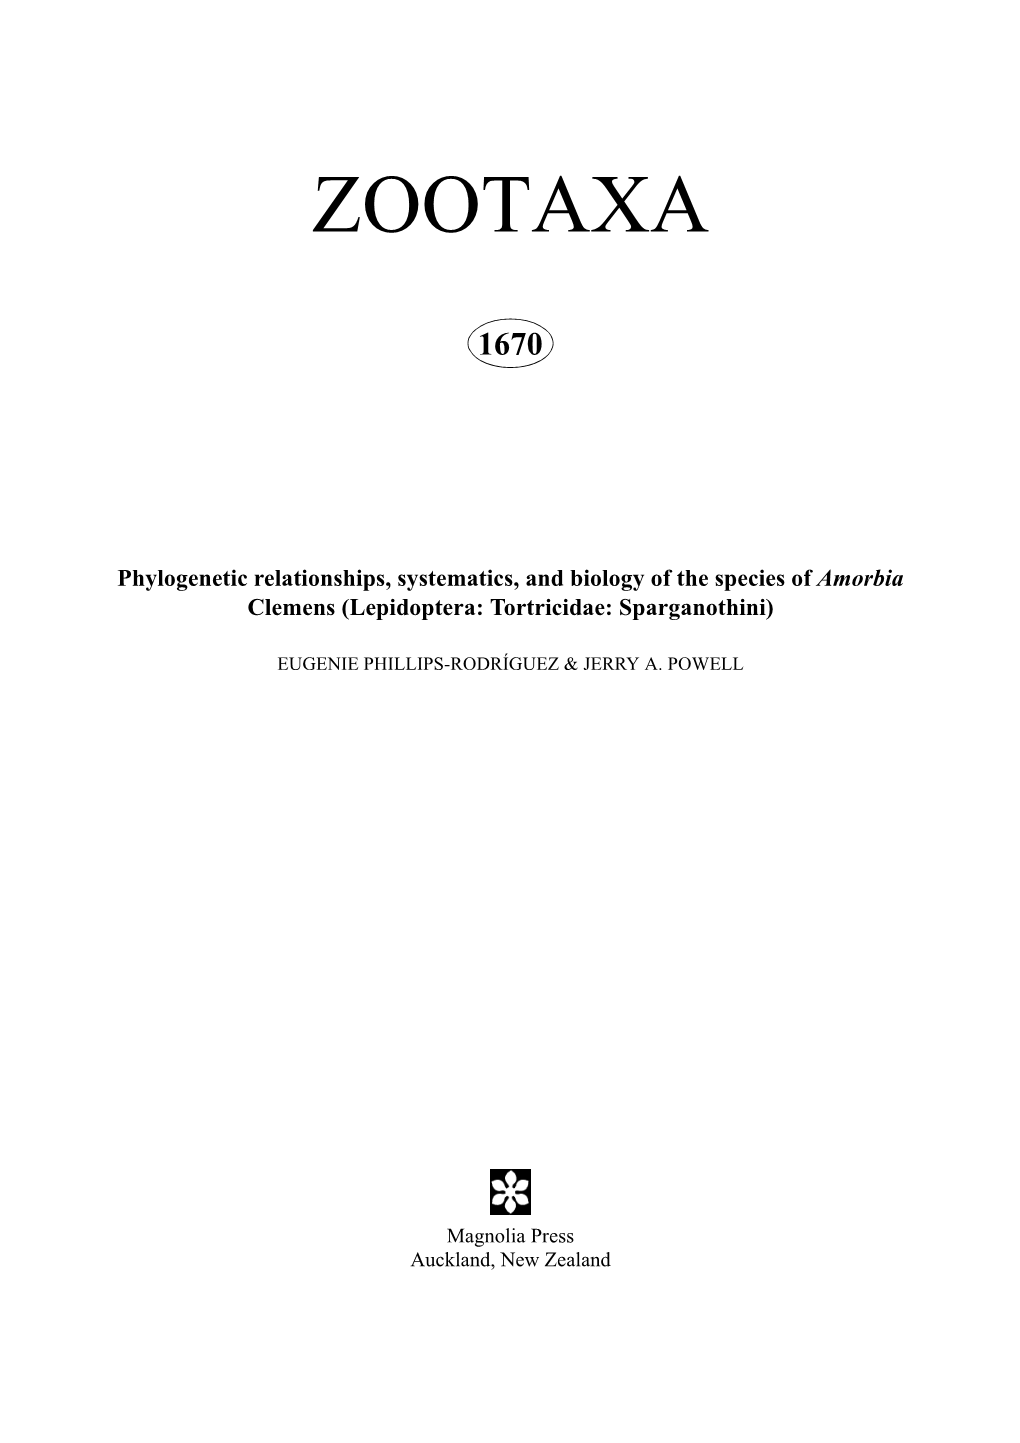 Zootaxa,Phylogenetic Relationships, Systematics, And